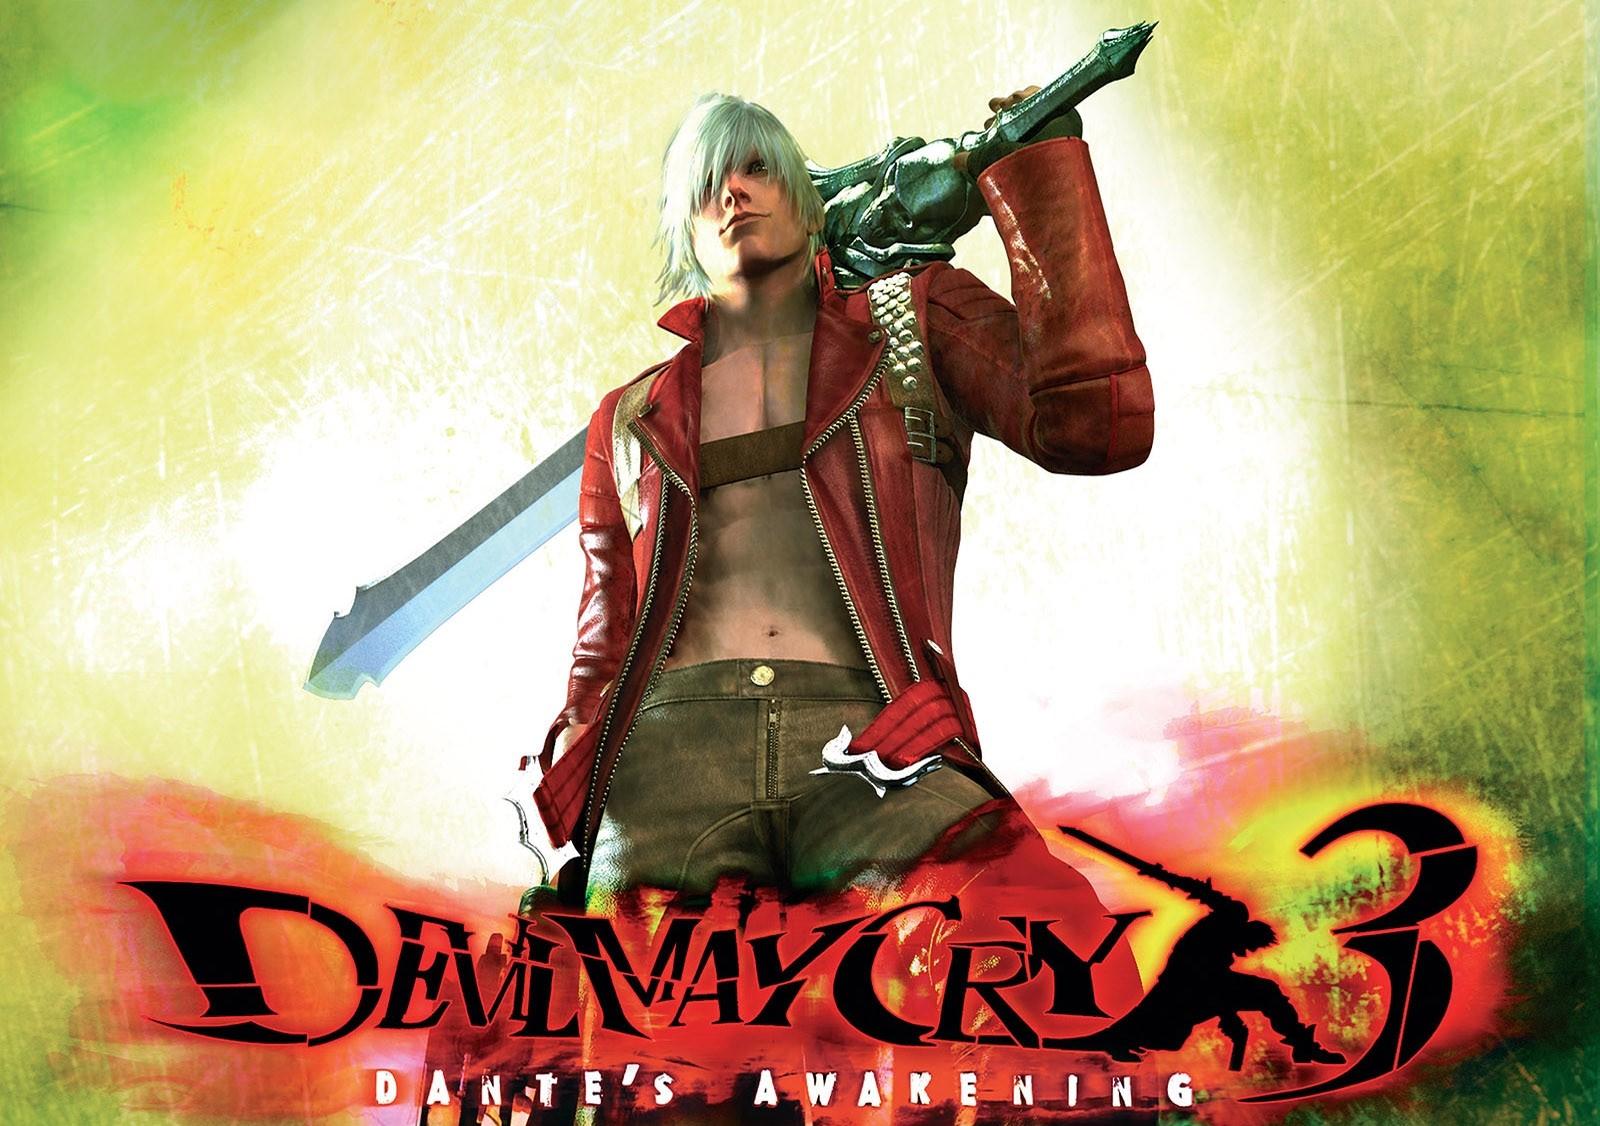 Devil may cry 3 can find steam фото 80